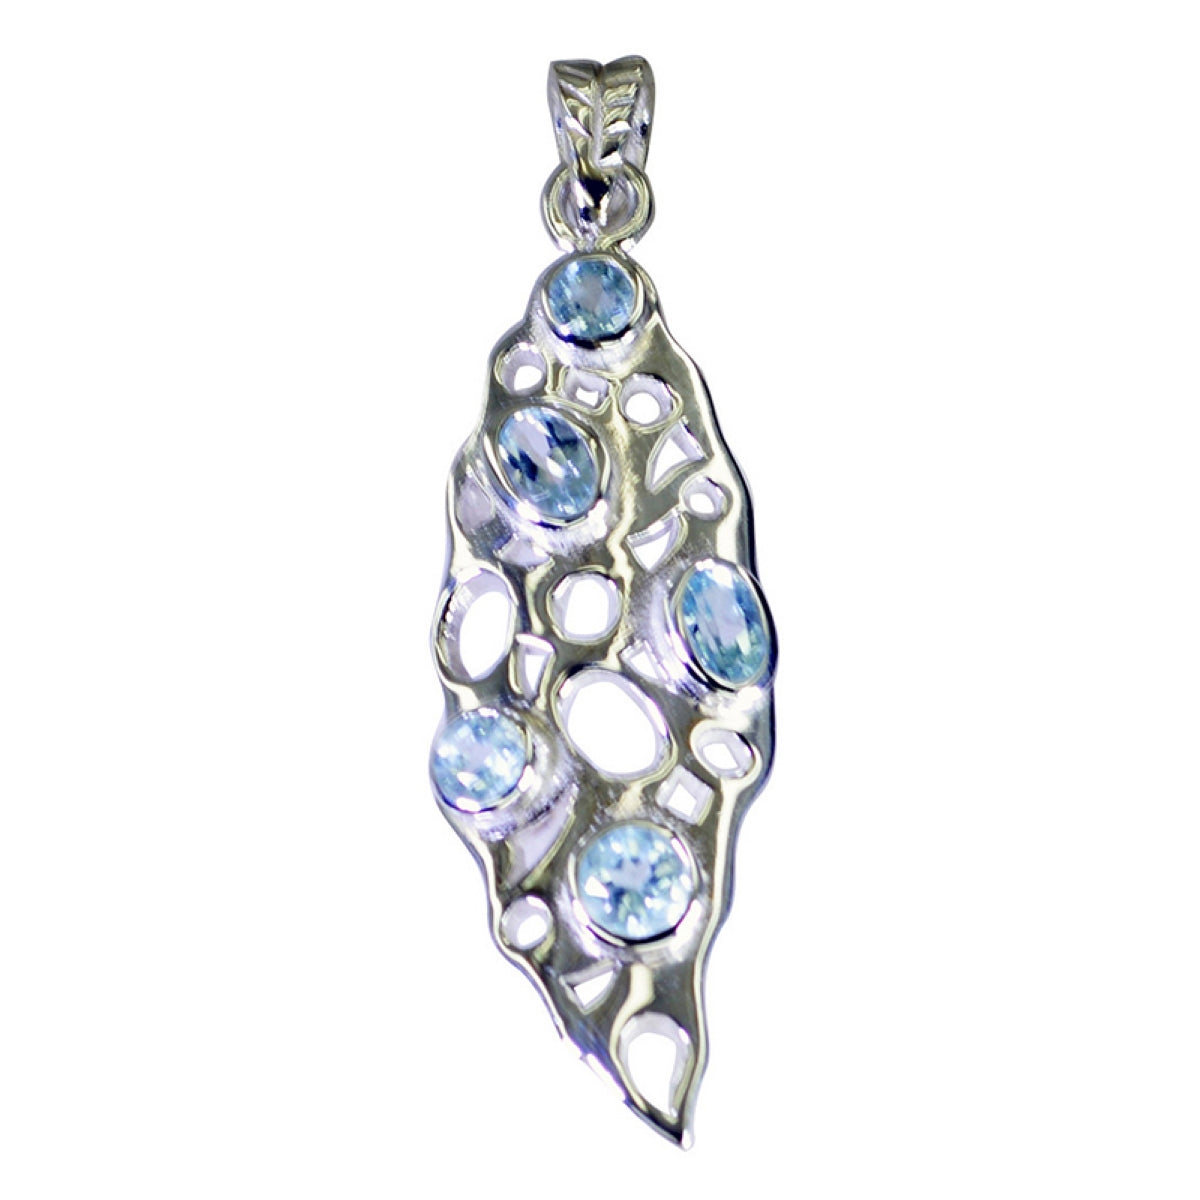 Riyo Attractive Gemstone Multi Faceted Blue Blue Topaz Sterling Silver Pendant Gift For Women